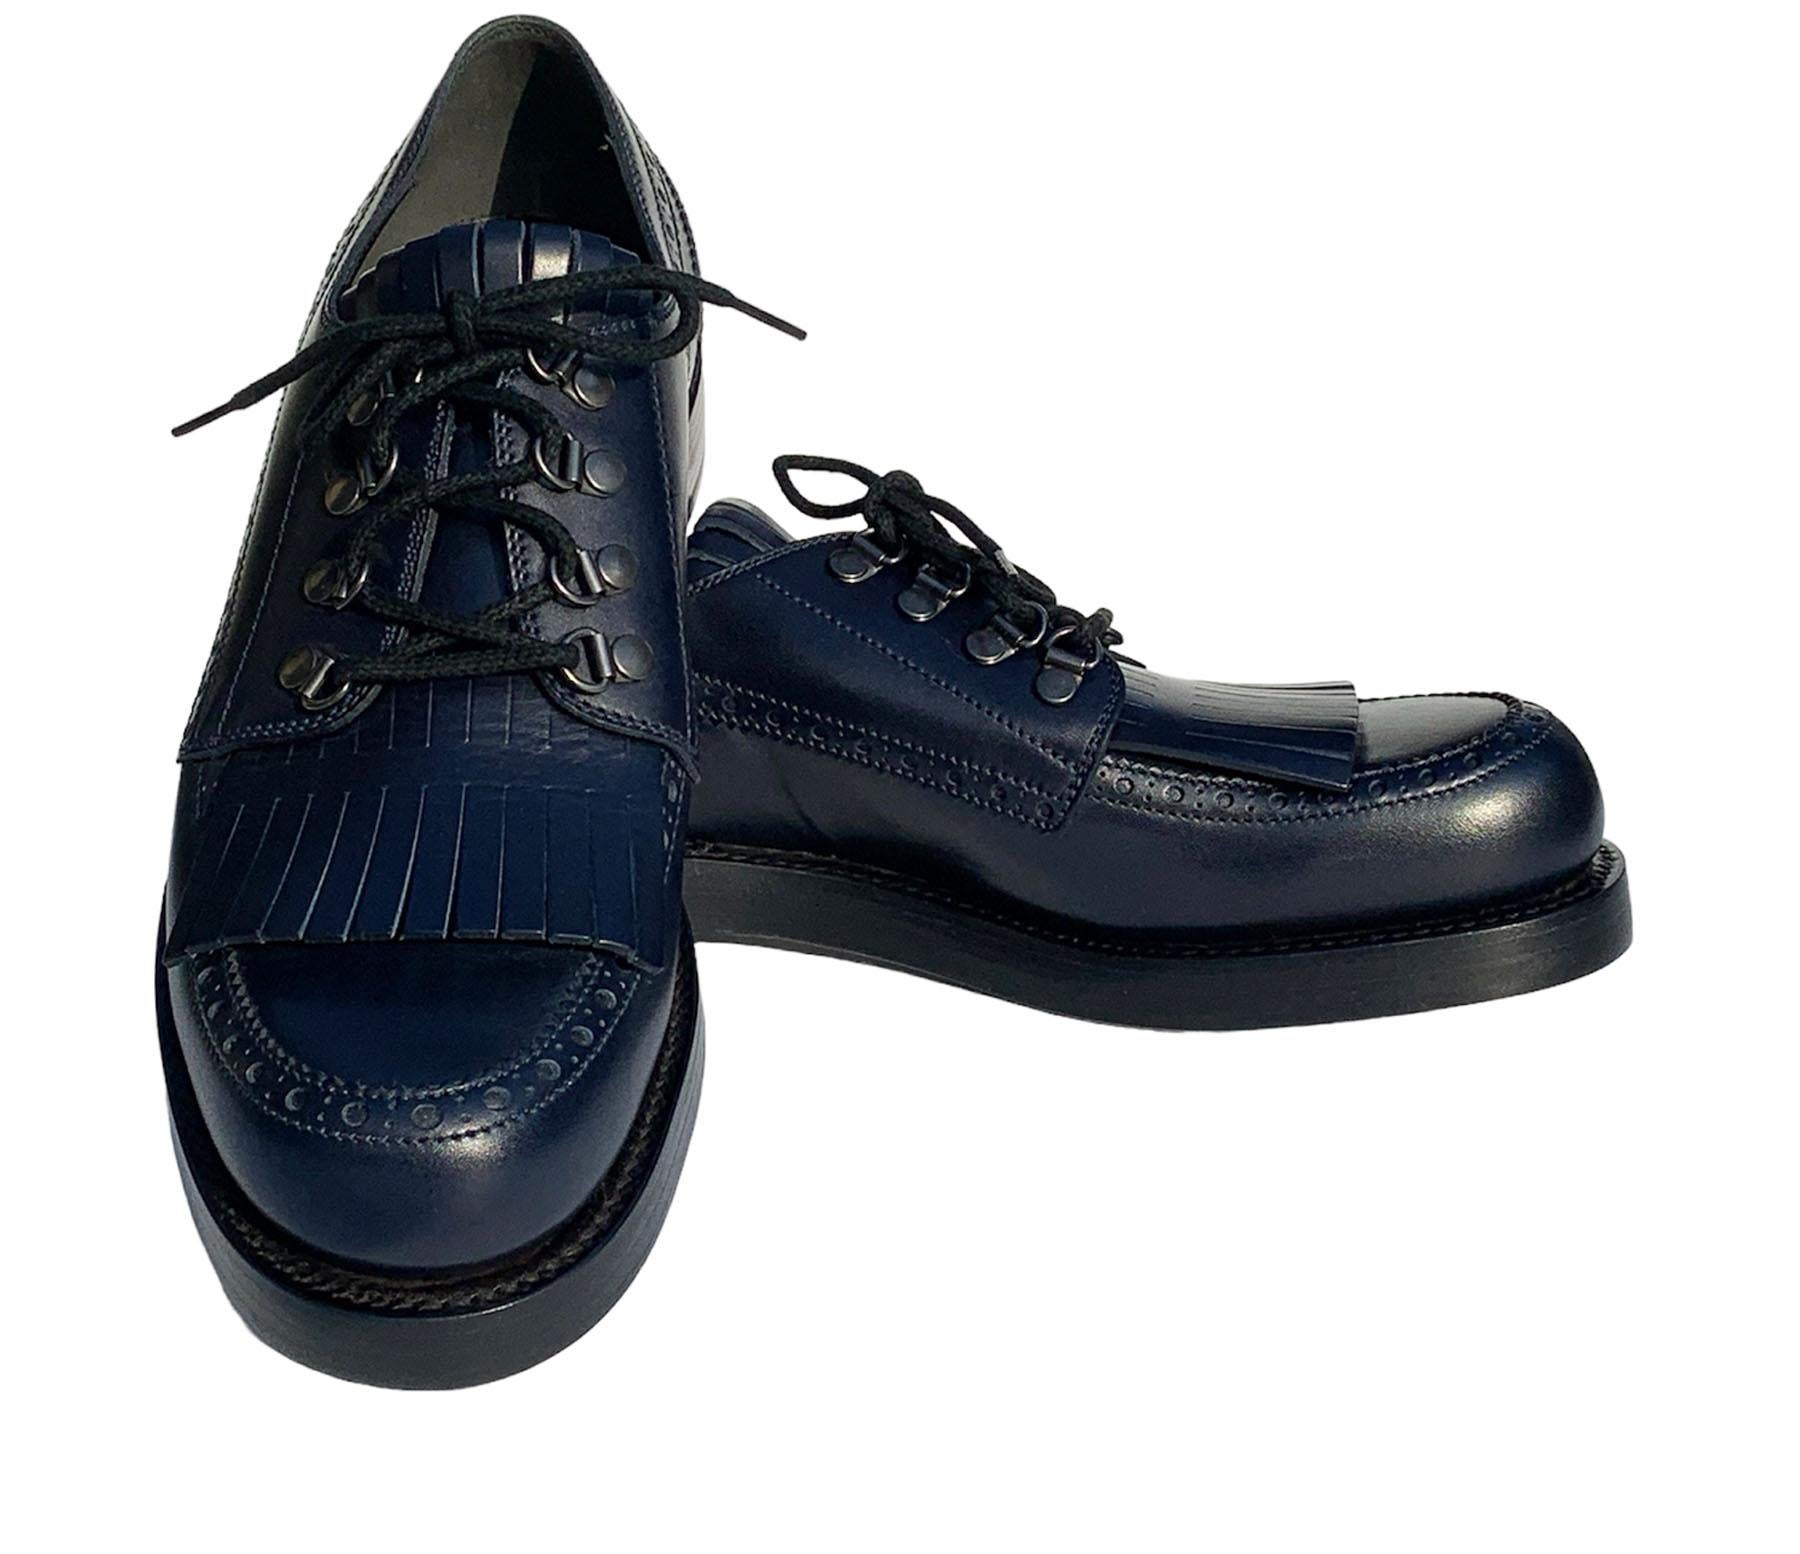 Gucci Men's Leather Fringed Brogue Lace-Up Shoes Dark Blue 
Gucci size 9 ( US 10 )
Mixing classic notes, such as brogueing and a hand-cut fringe, with unexpected touches, such as a stacked leather sole and metal loops, these lace-ups command